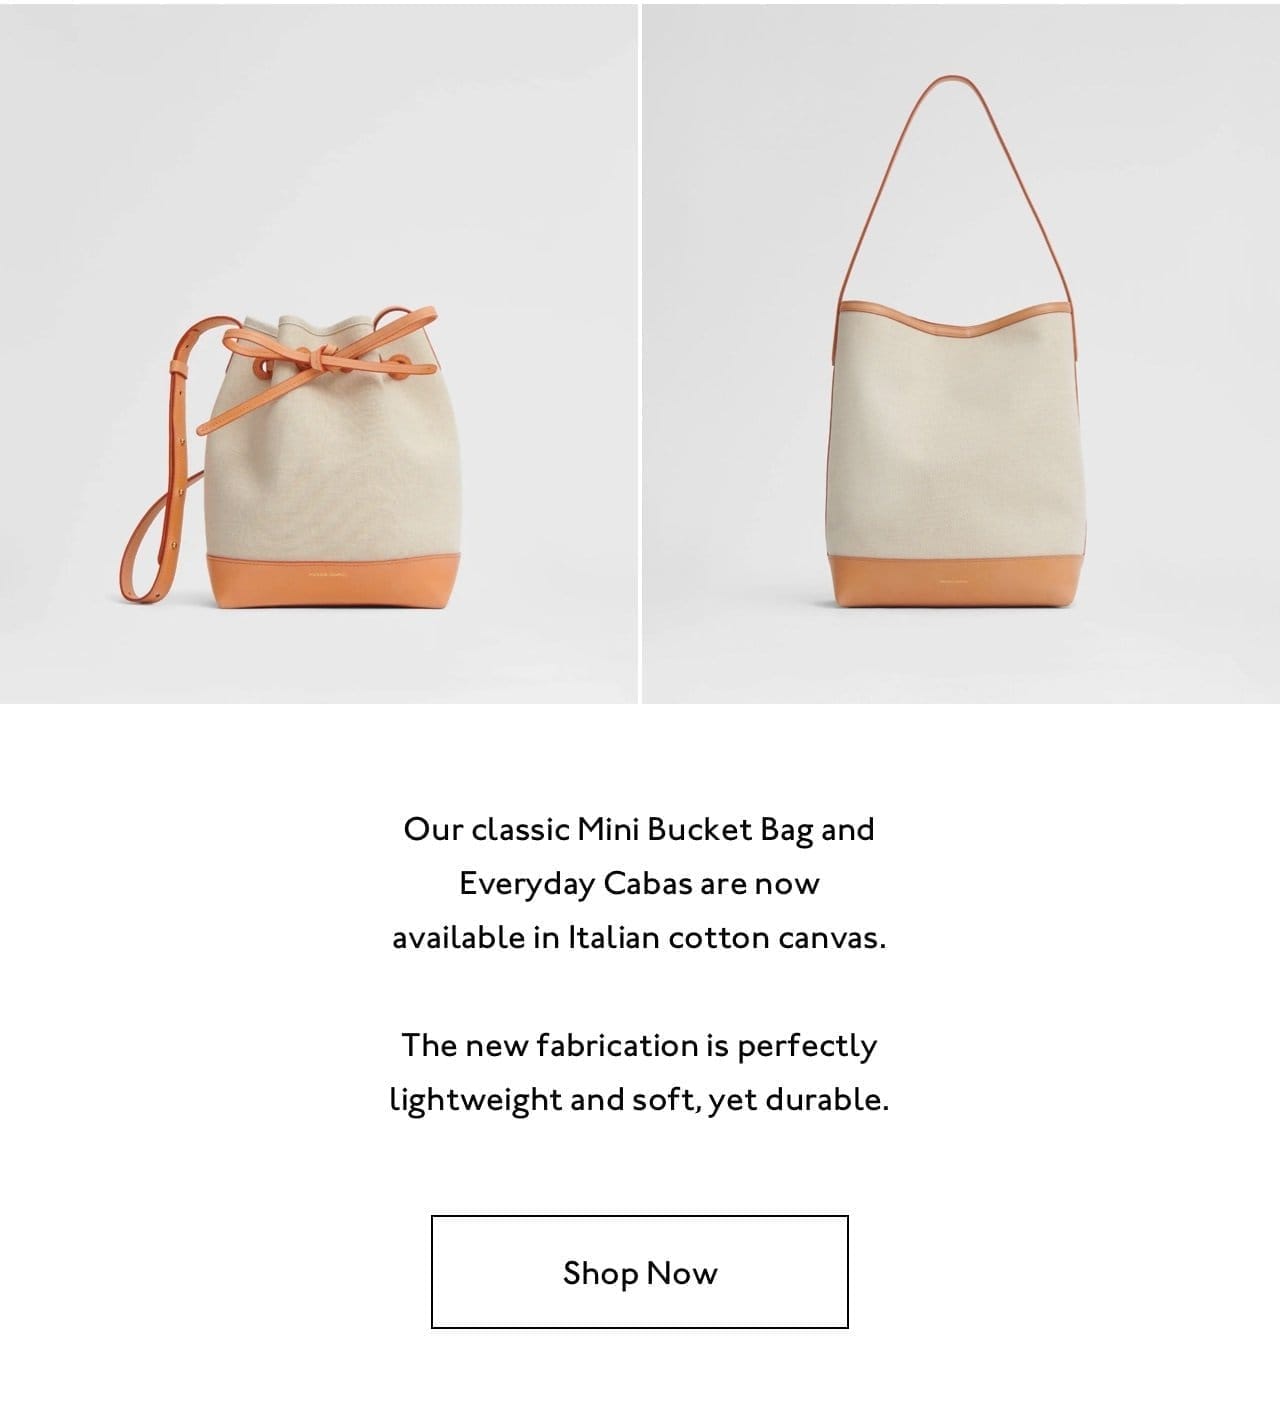 Our classic Mini Bucket Bag and Eveyrday Cabas are now available in Italian cotton canvas.